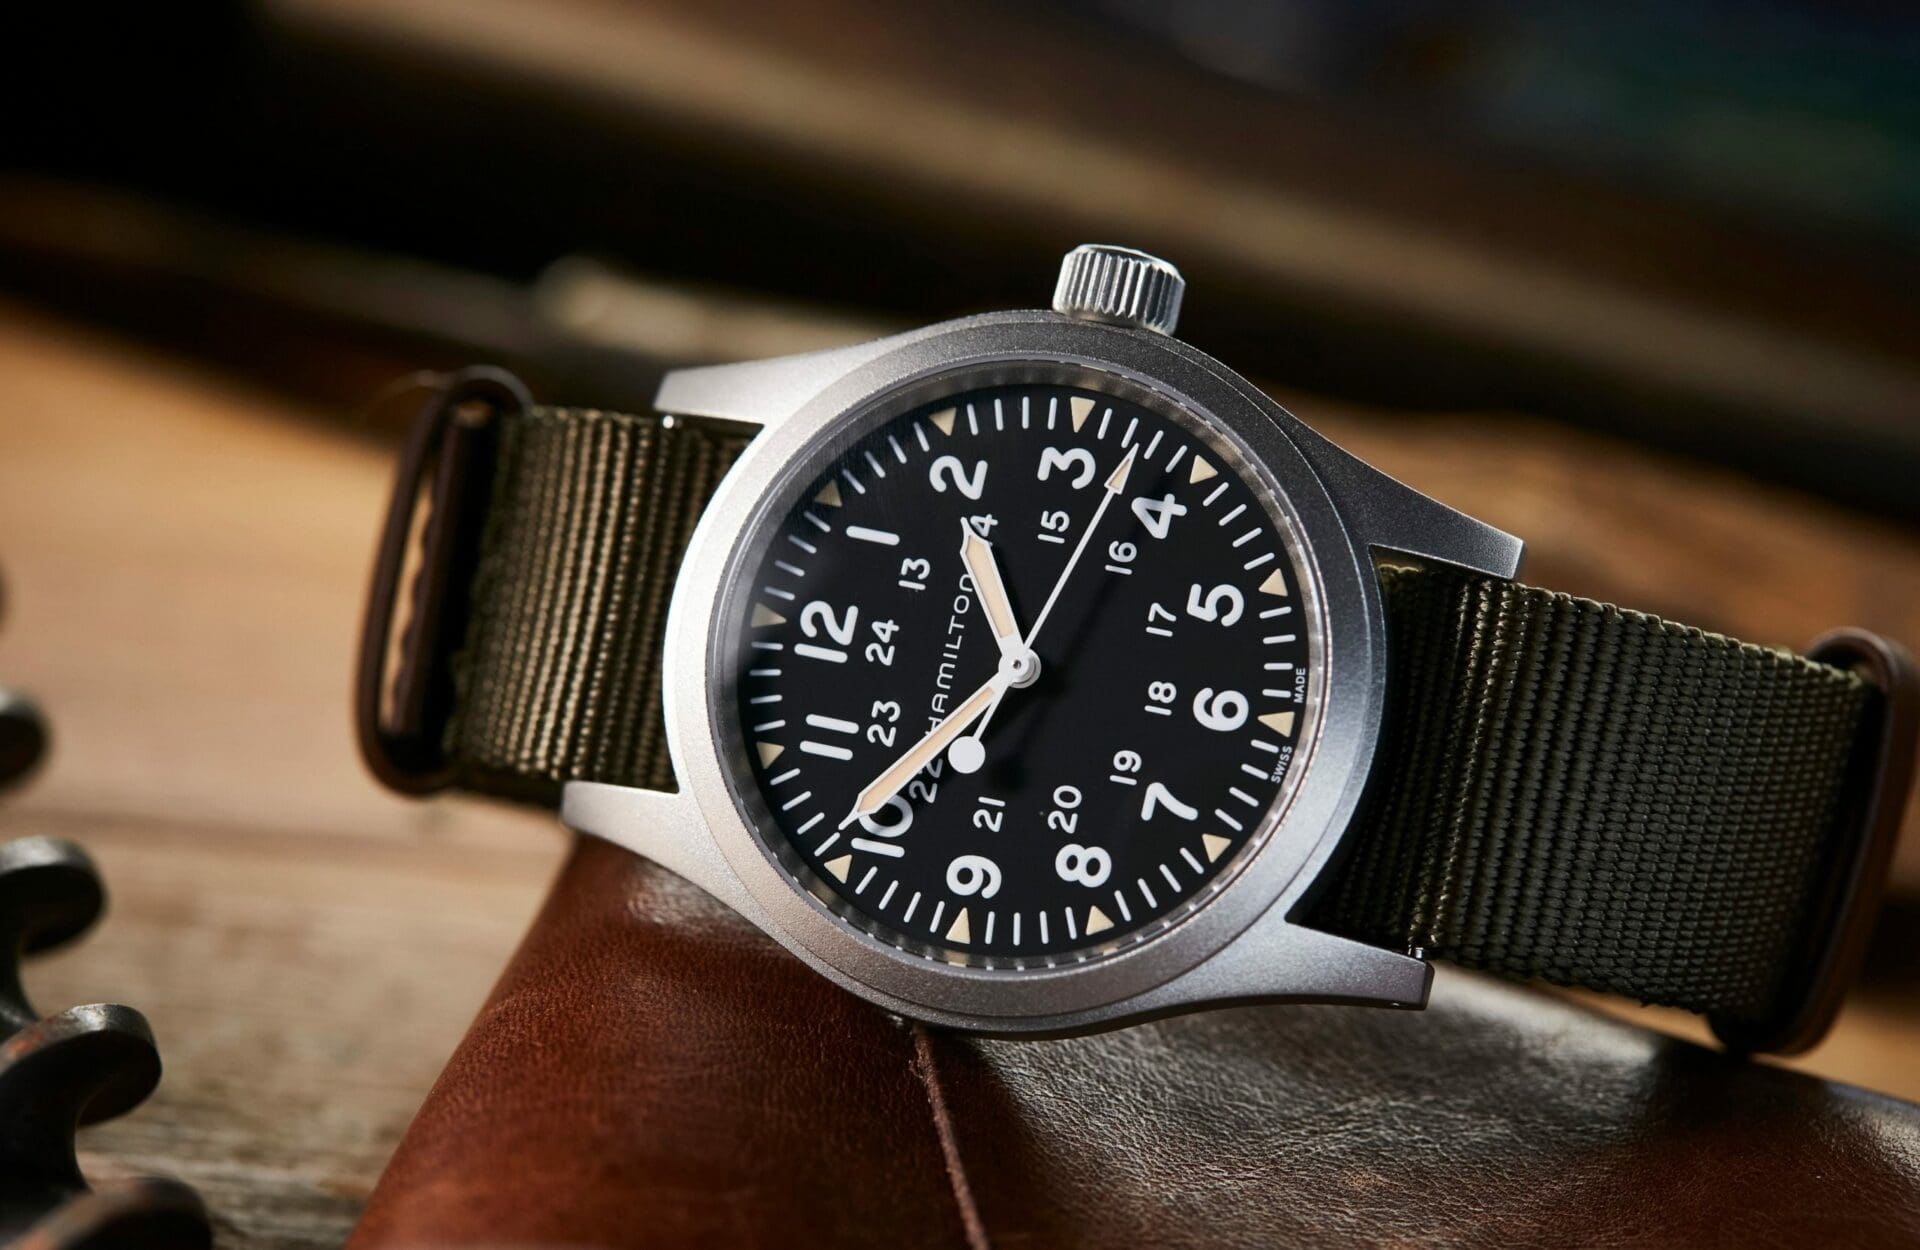 The Hamilton Khaki Field collection shows why the brand is still the field watch king